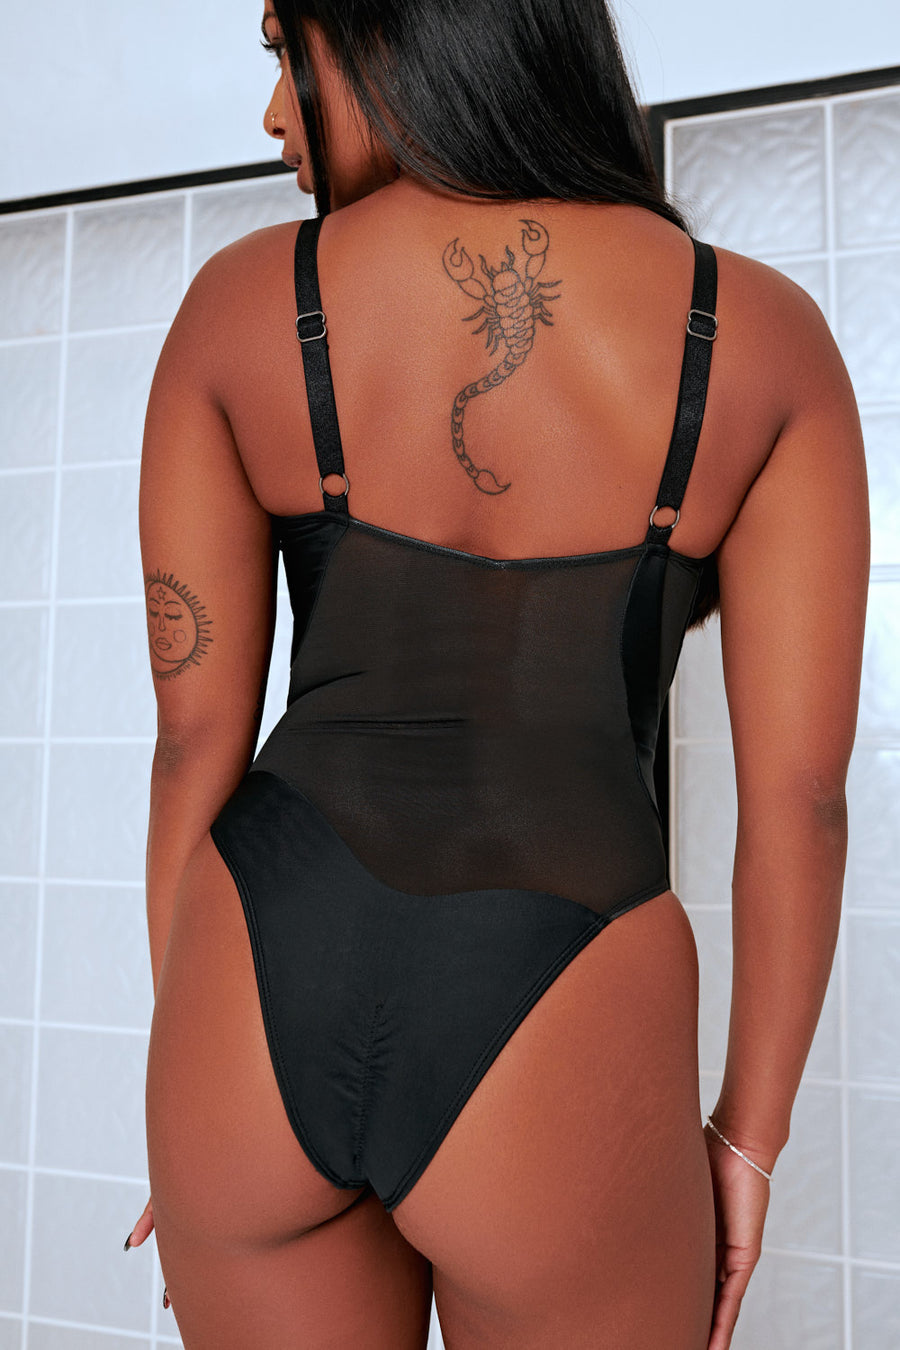 Silhouette One-Piece Body Suit Black with Black